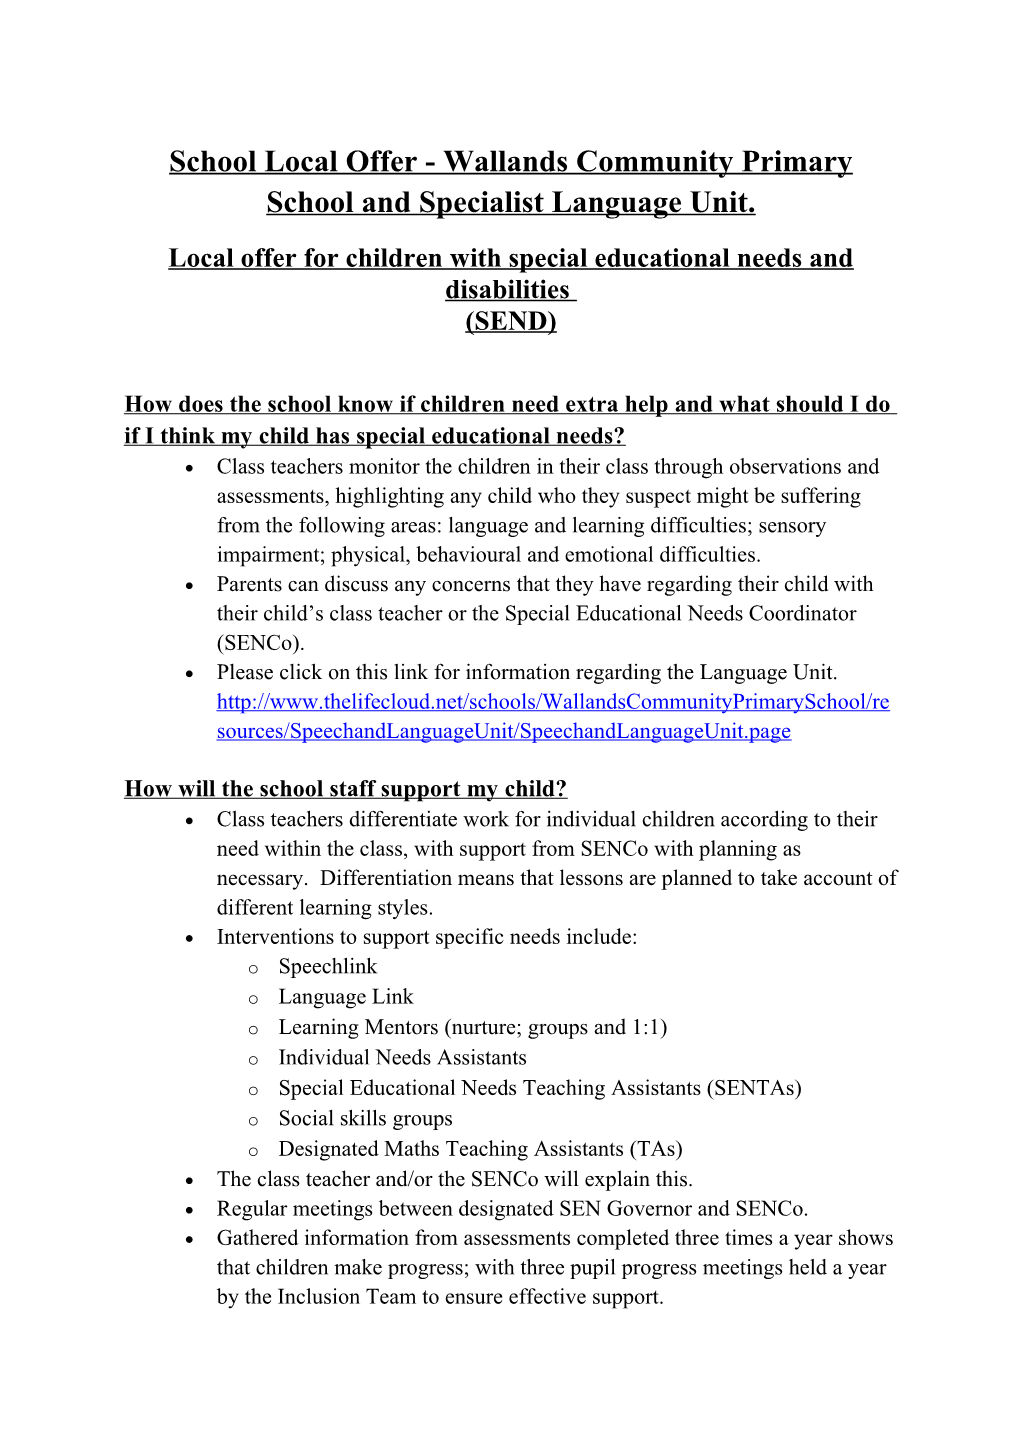 School Local Offer - Wallands Community Primary School and Specialist Language Unit